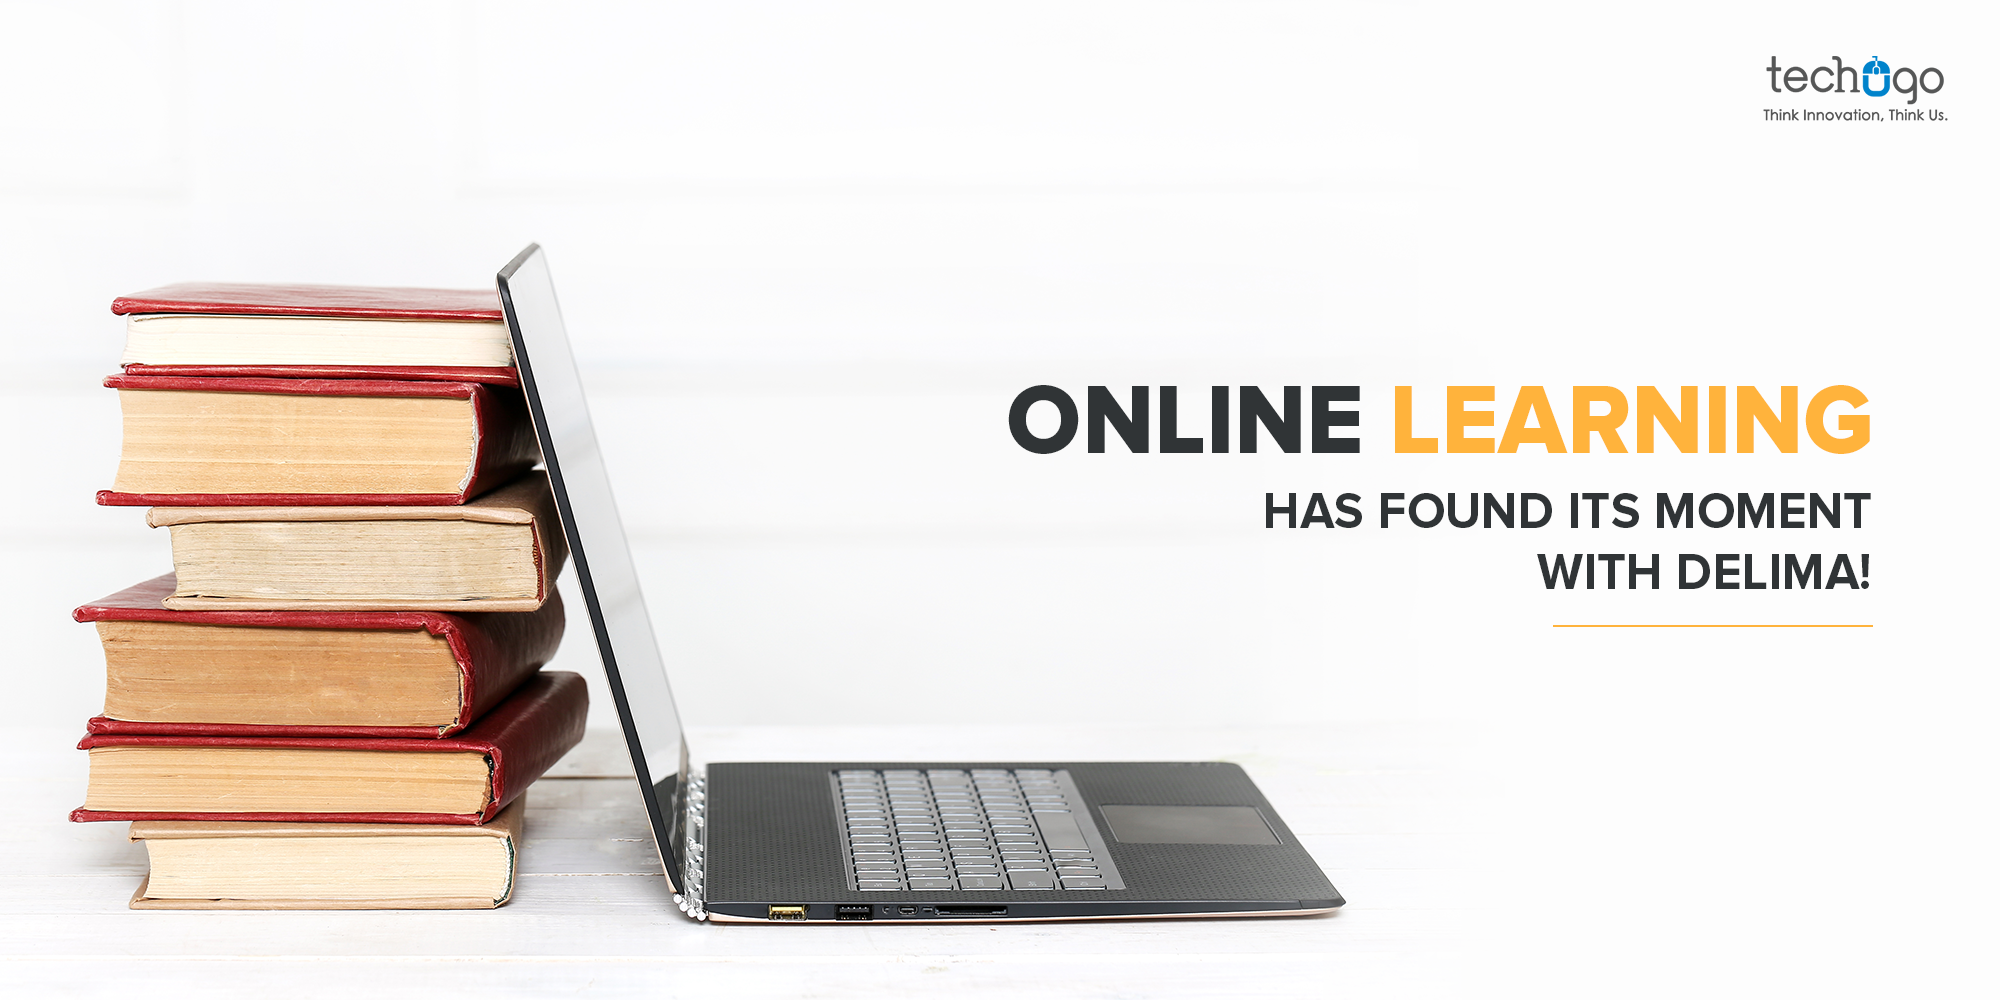 Online Learning Has Found Its Moment With Delima!